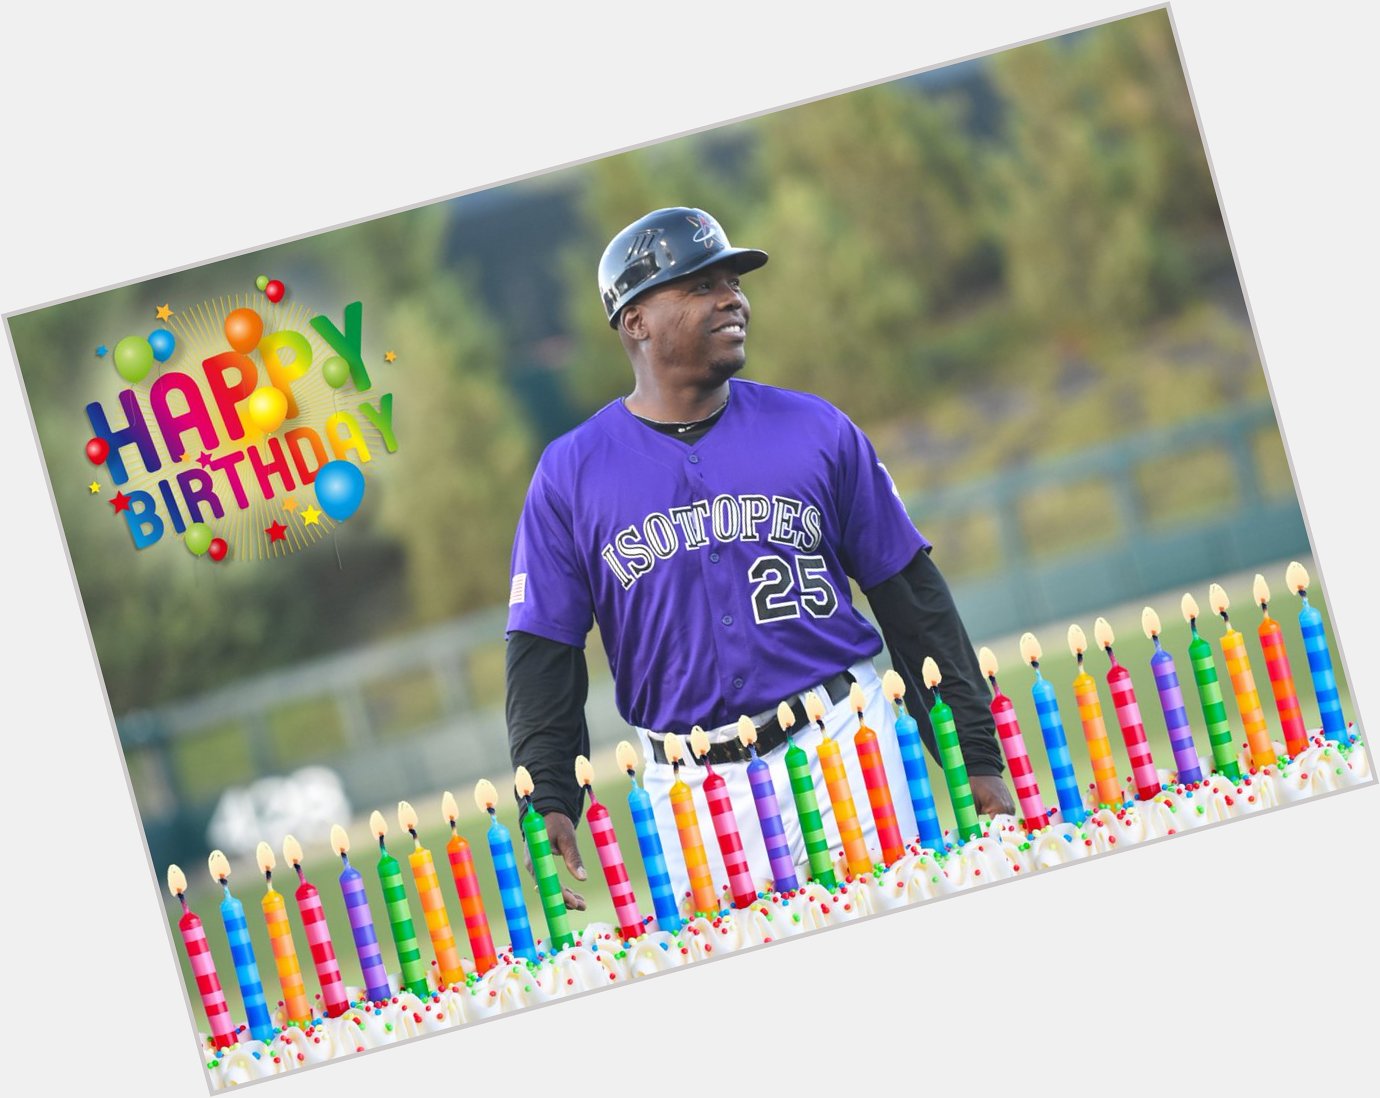 Happy 52nd Birthday to manager Glenallen Hill!    